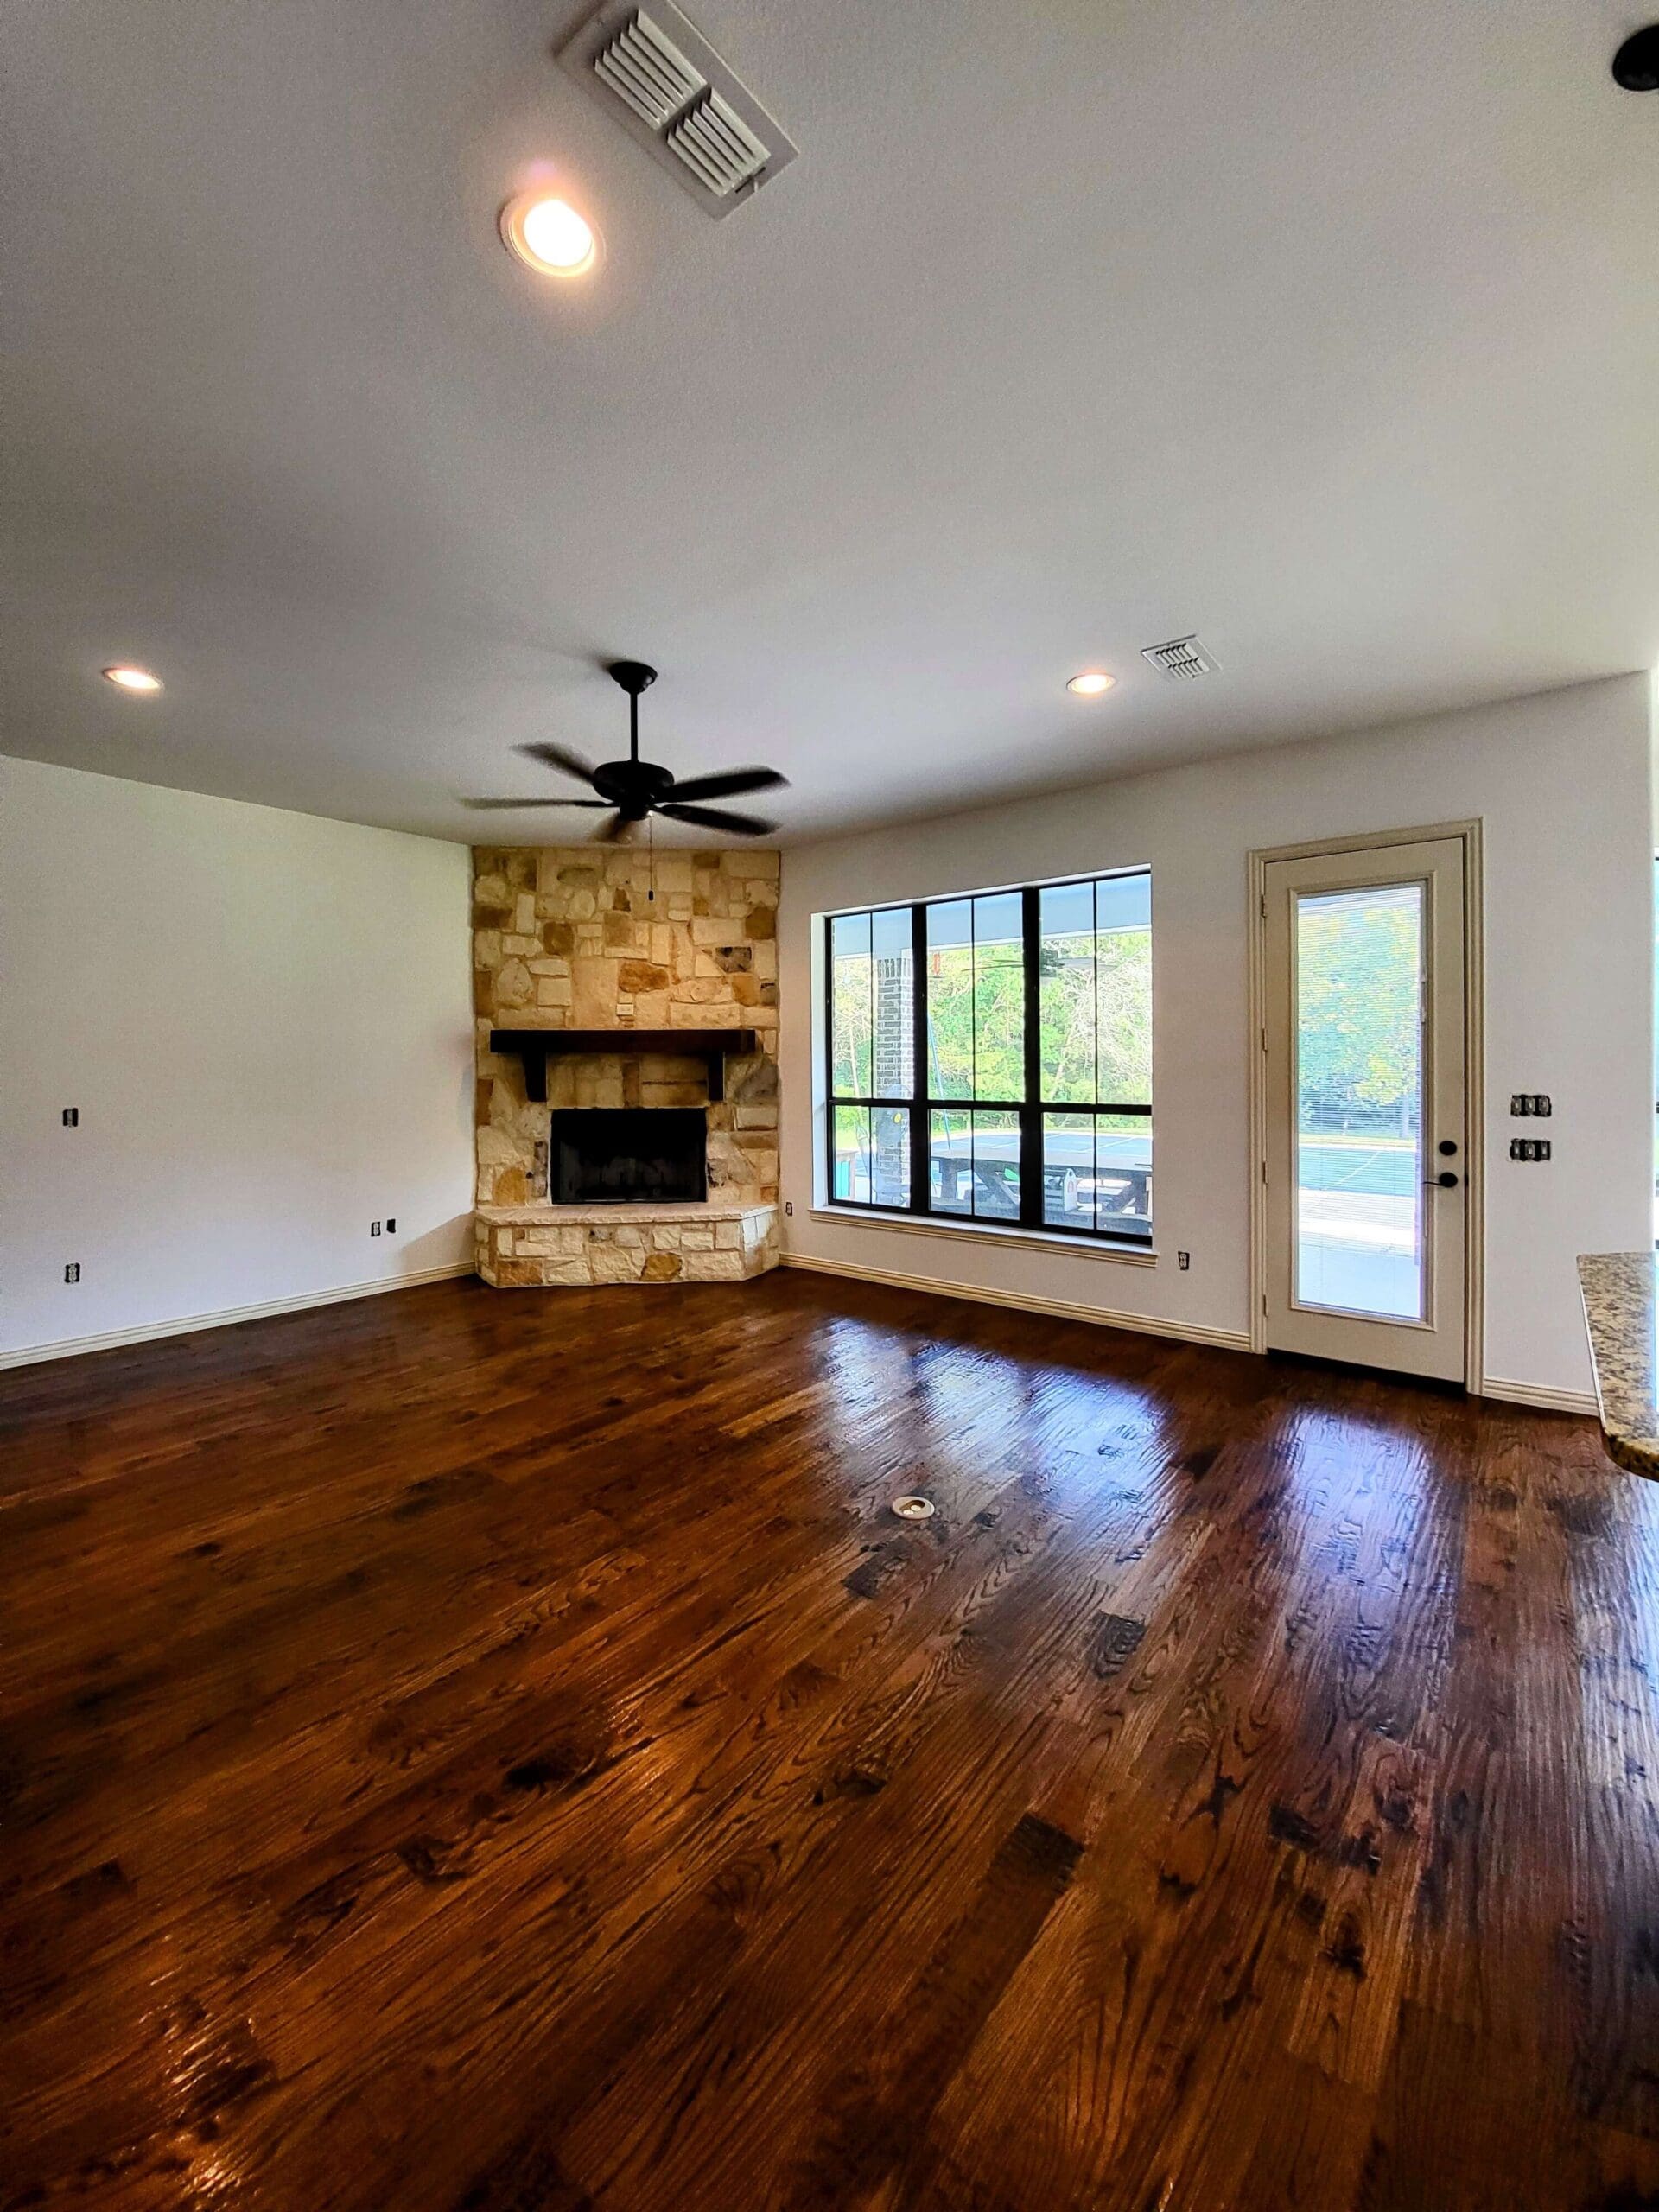 Spacious living room with hardwood floors and cozy fireplace.